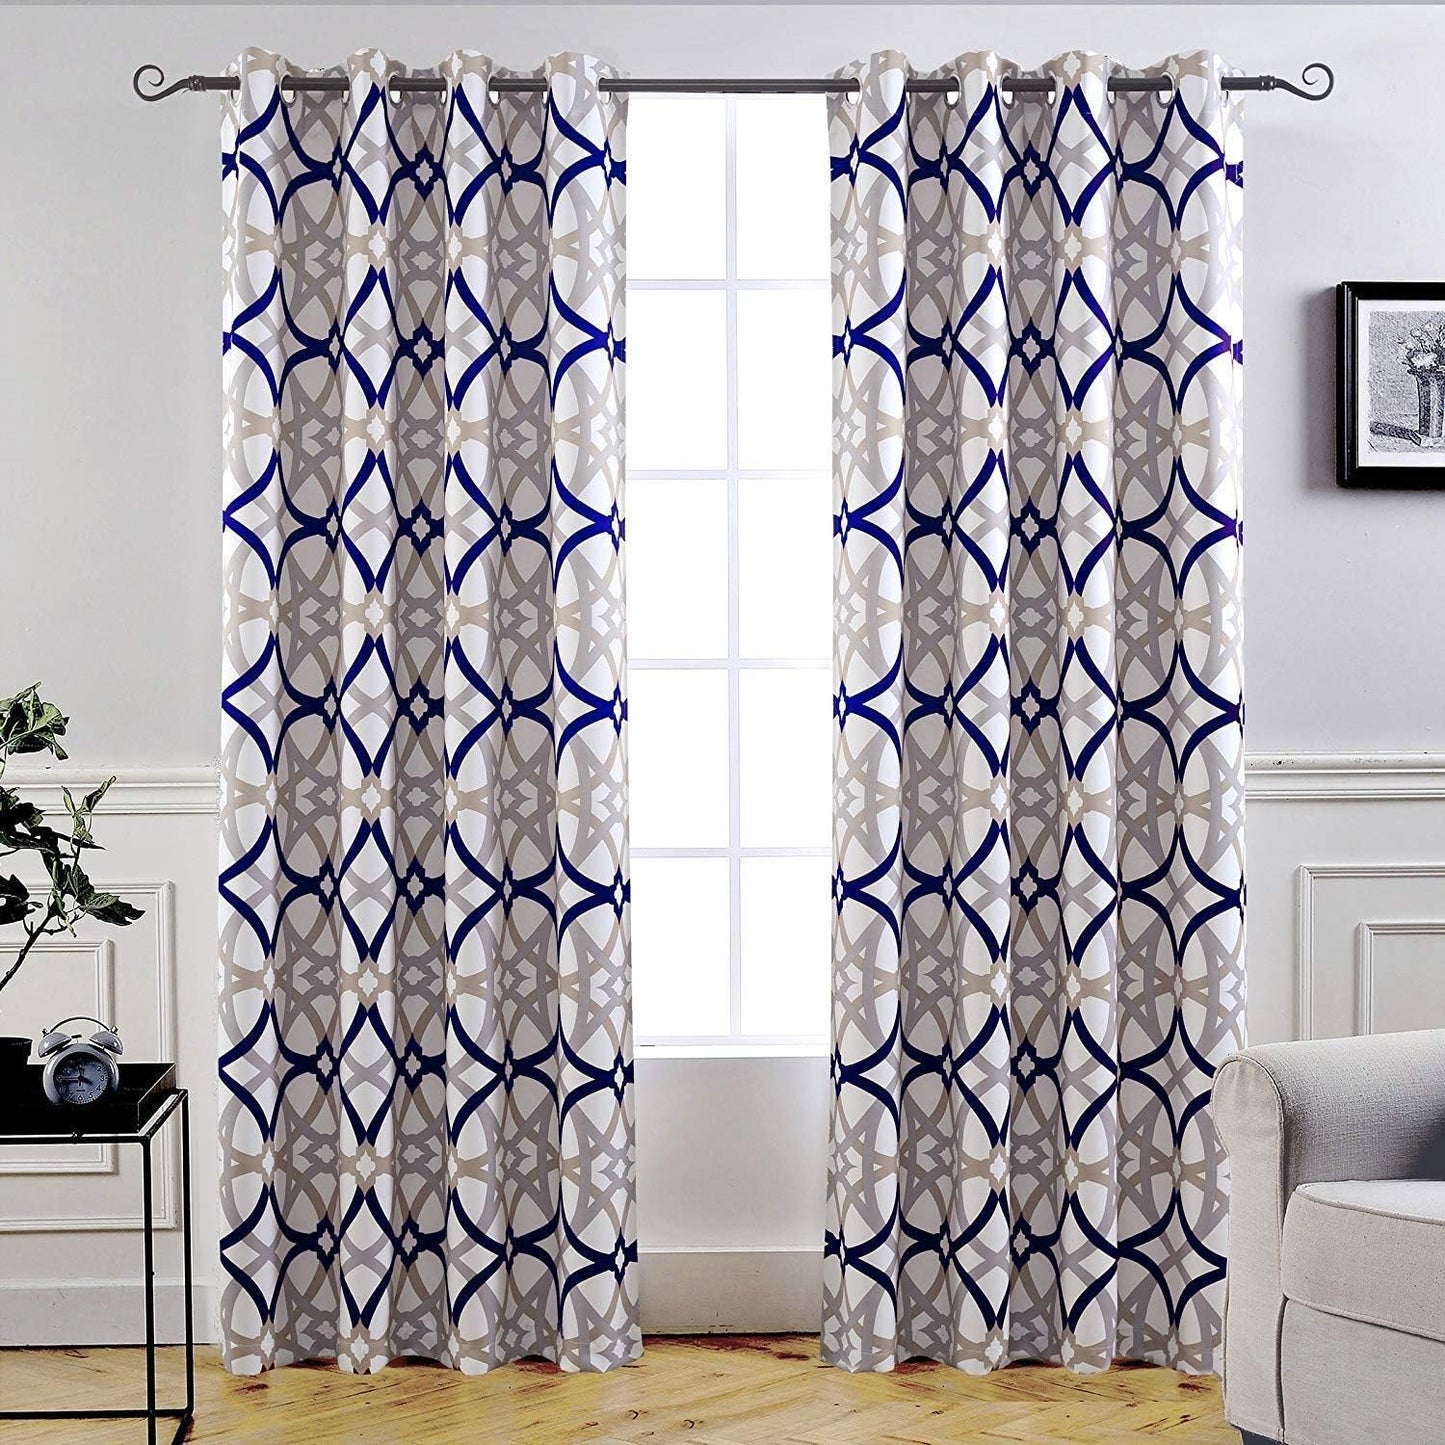 Driftaway Alexander Thermal Blackout Grommet Unlined Window Curtains Spiral Geo Trellis Pattern Set of 2 Panels Each Size 52 Inch by 84 Inch Red and Gray  DriftAway Navy/Gray 52"X84" 